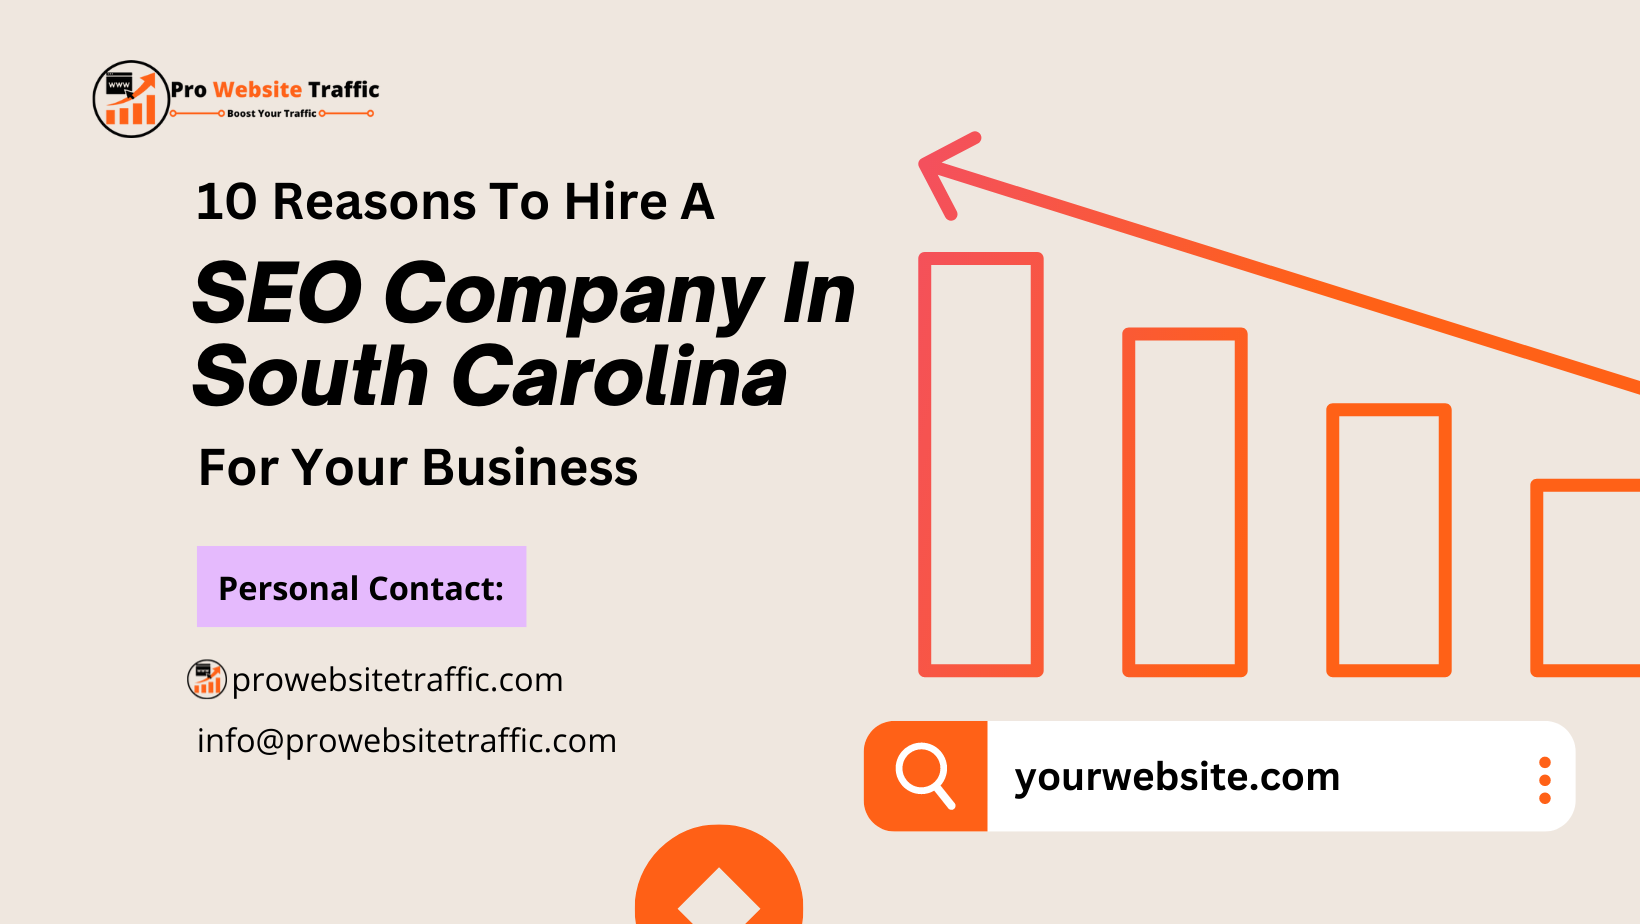 10 Reasons to Hire A SEO Company in South Carolina For Your Business